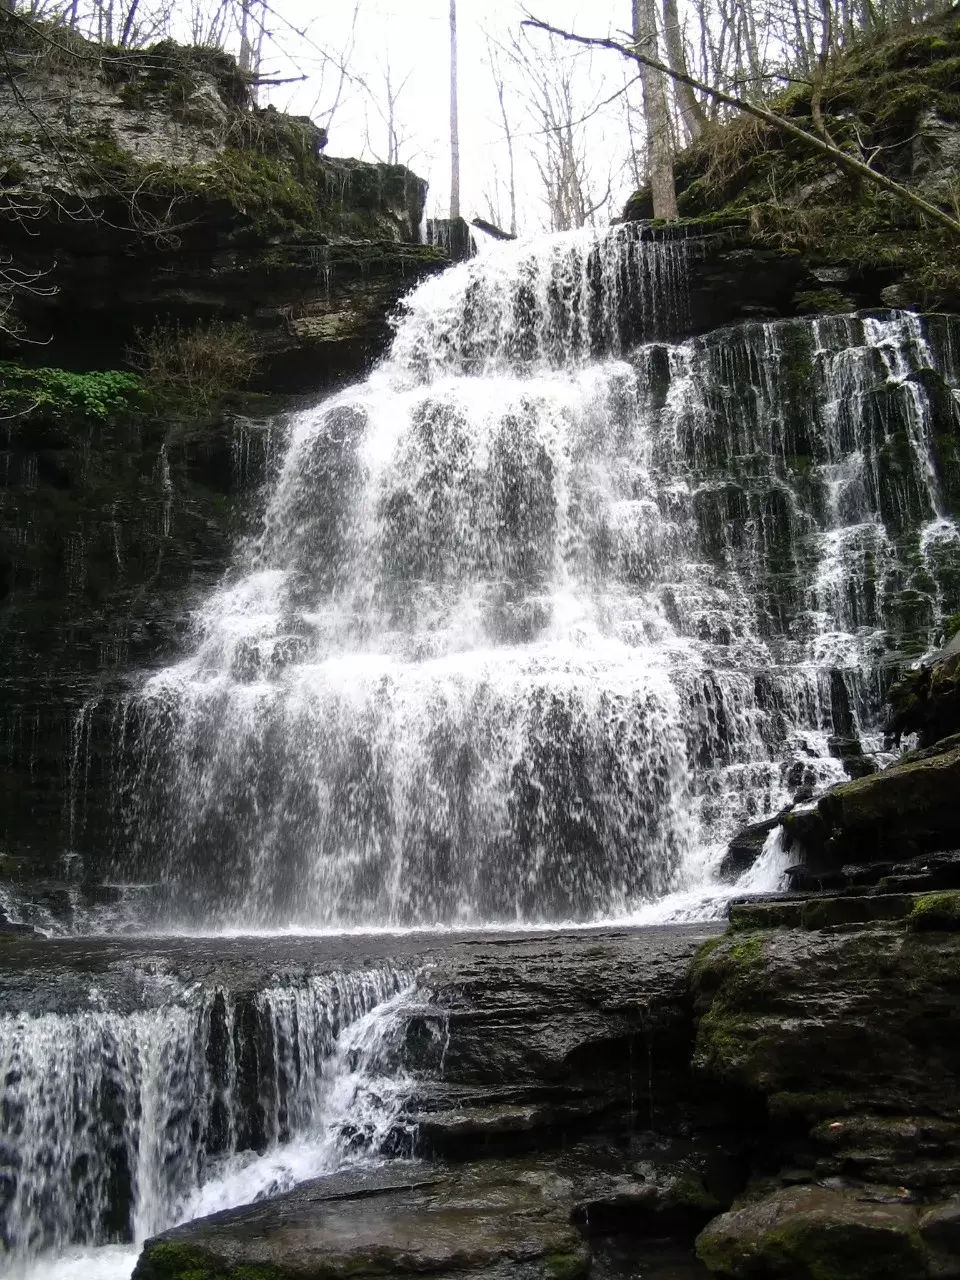 Summer Tullahoma TN Weather is great for hiking and seeing waterfalls